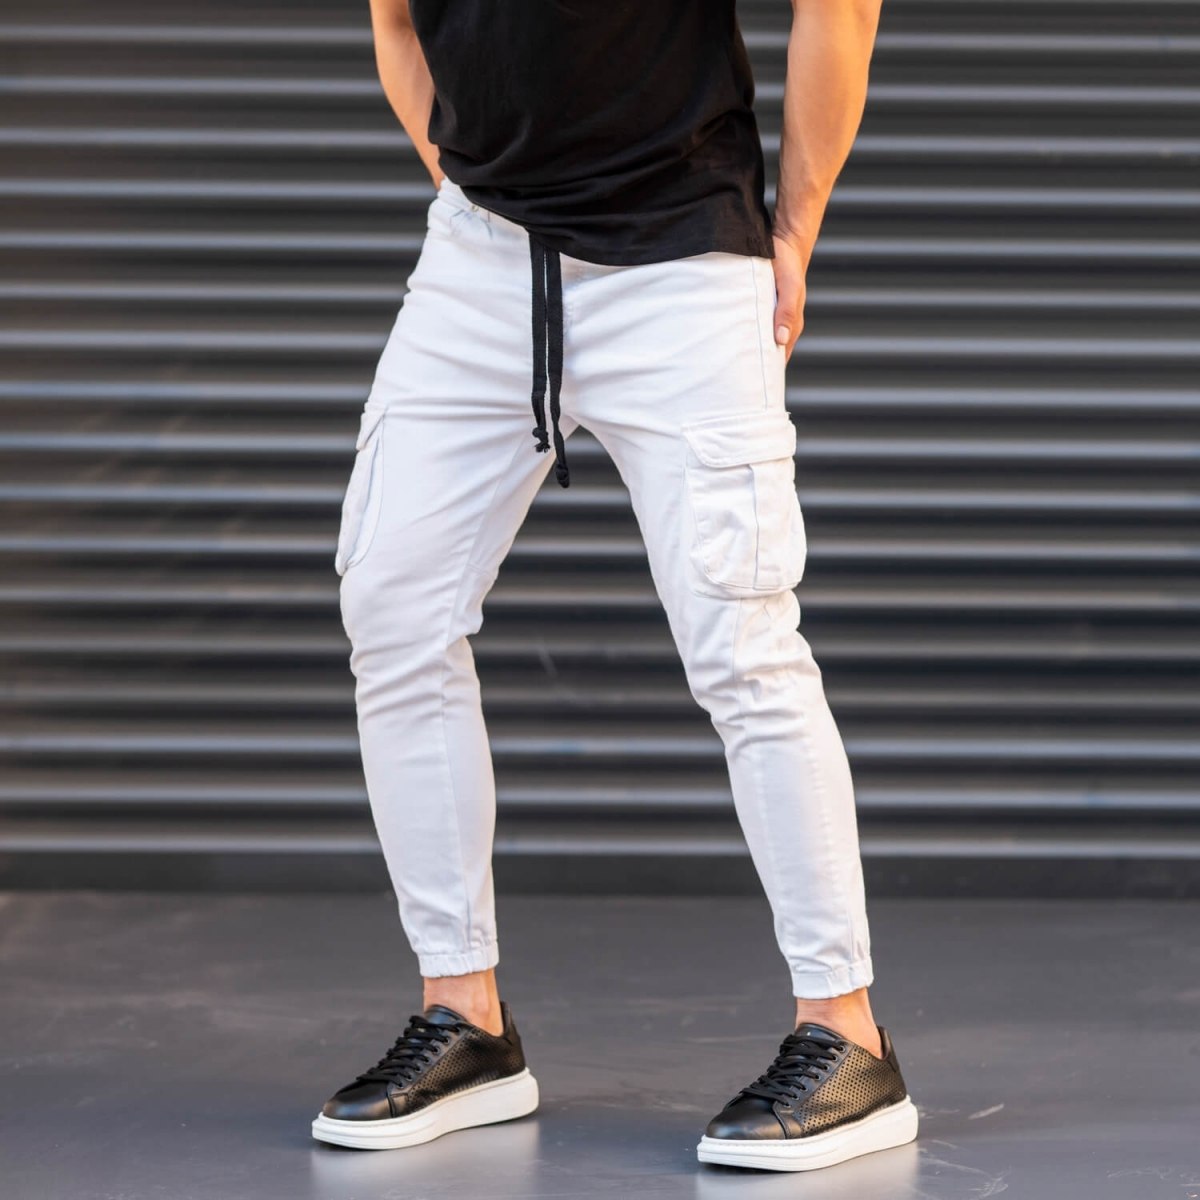 Men's Jeans with Pockets Style in White - 3